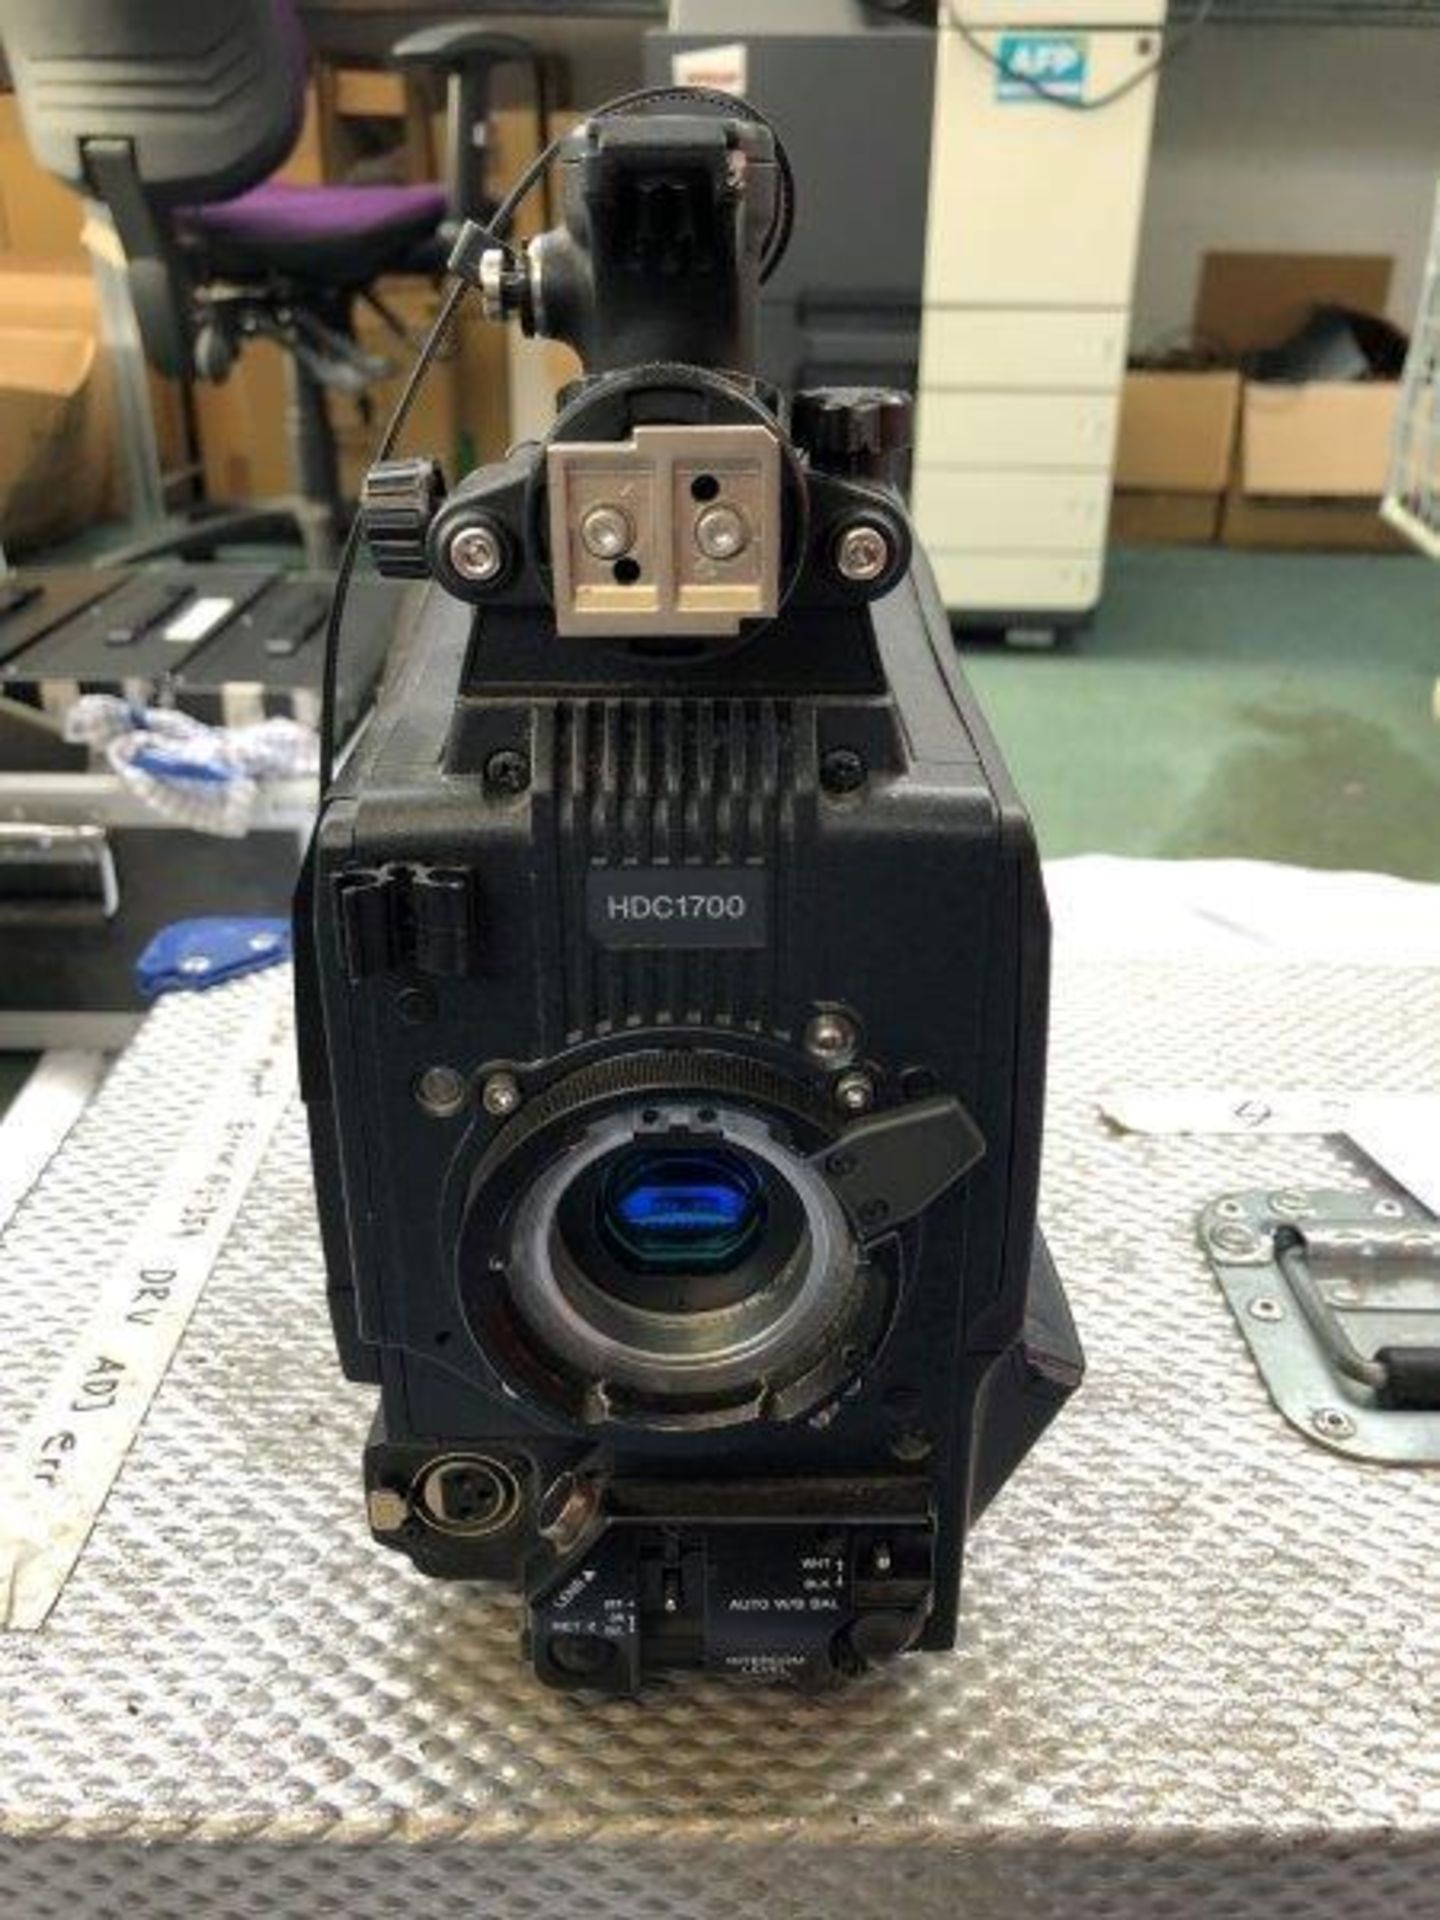 Sony HDC 1700 Camera Serial Number: 40123, In Flight Case - Image 5 of 5